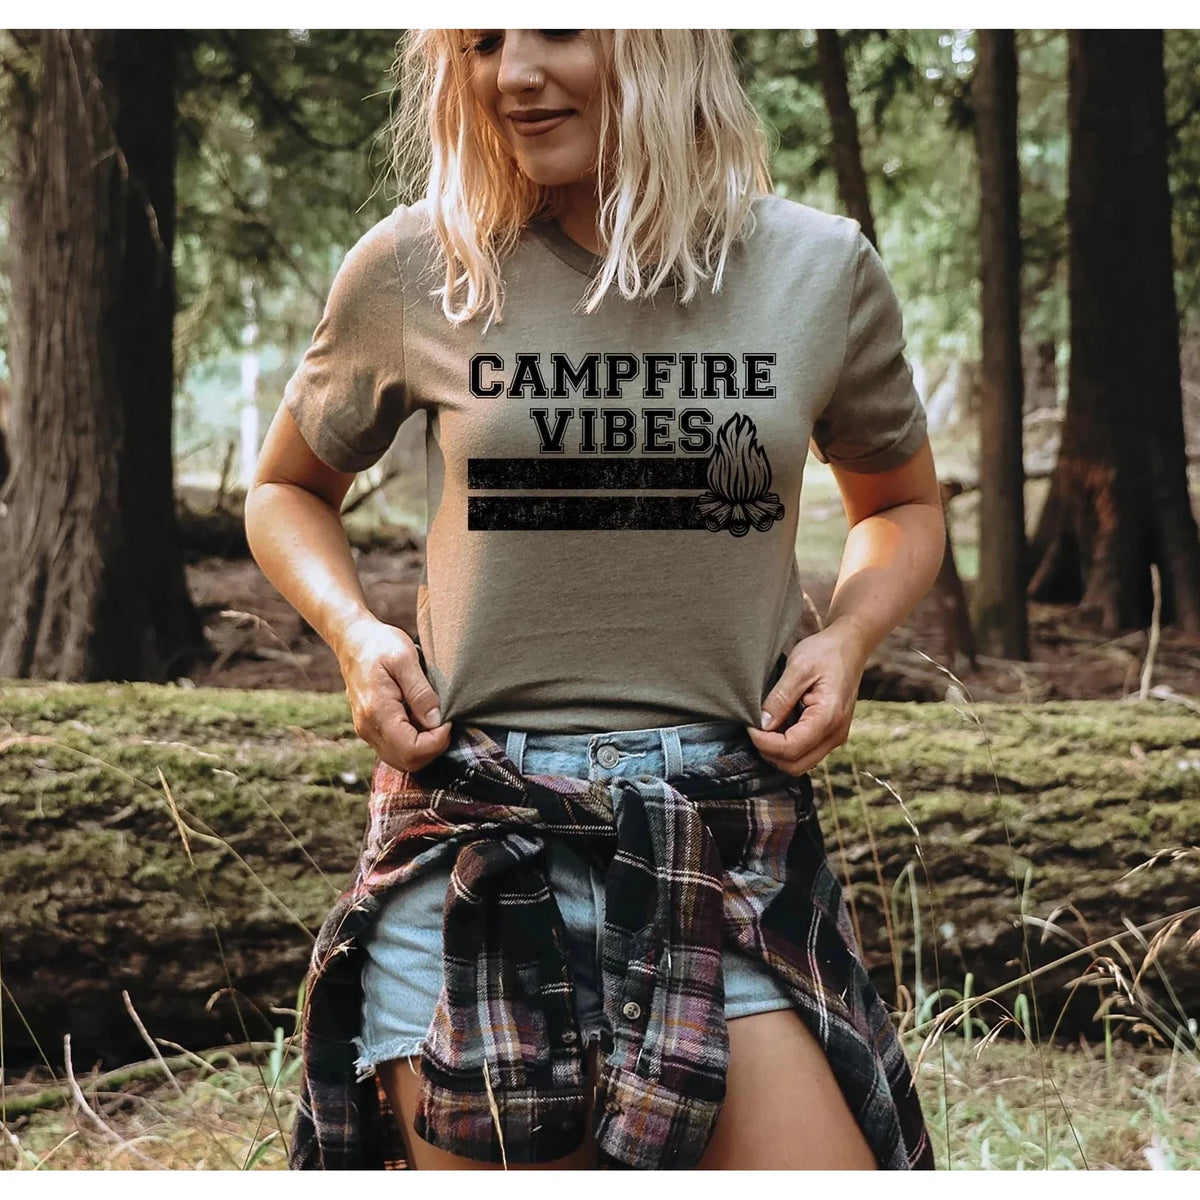 Campfire Vibes  Graphic Tee ALLOW 7 DAYS TO SHIP + SHIP TIME